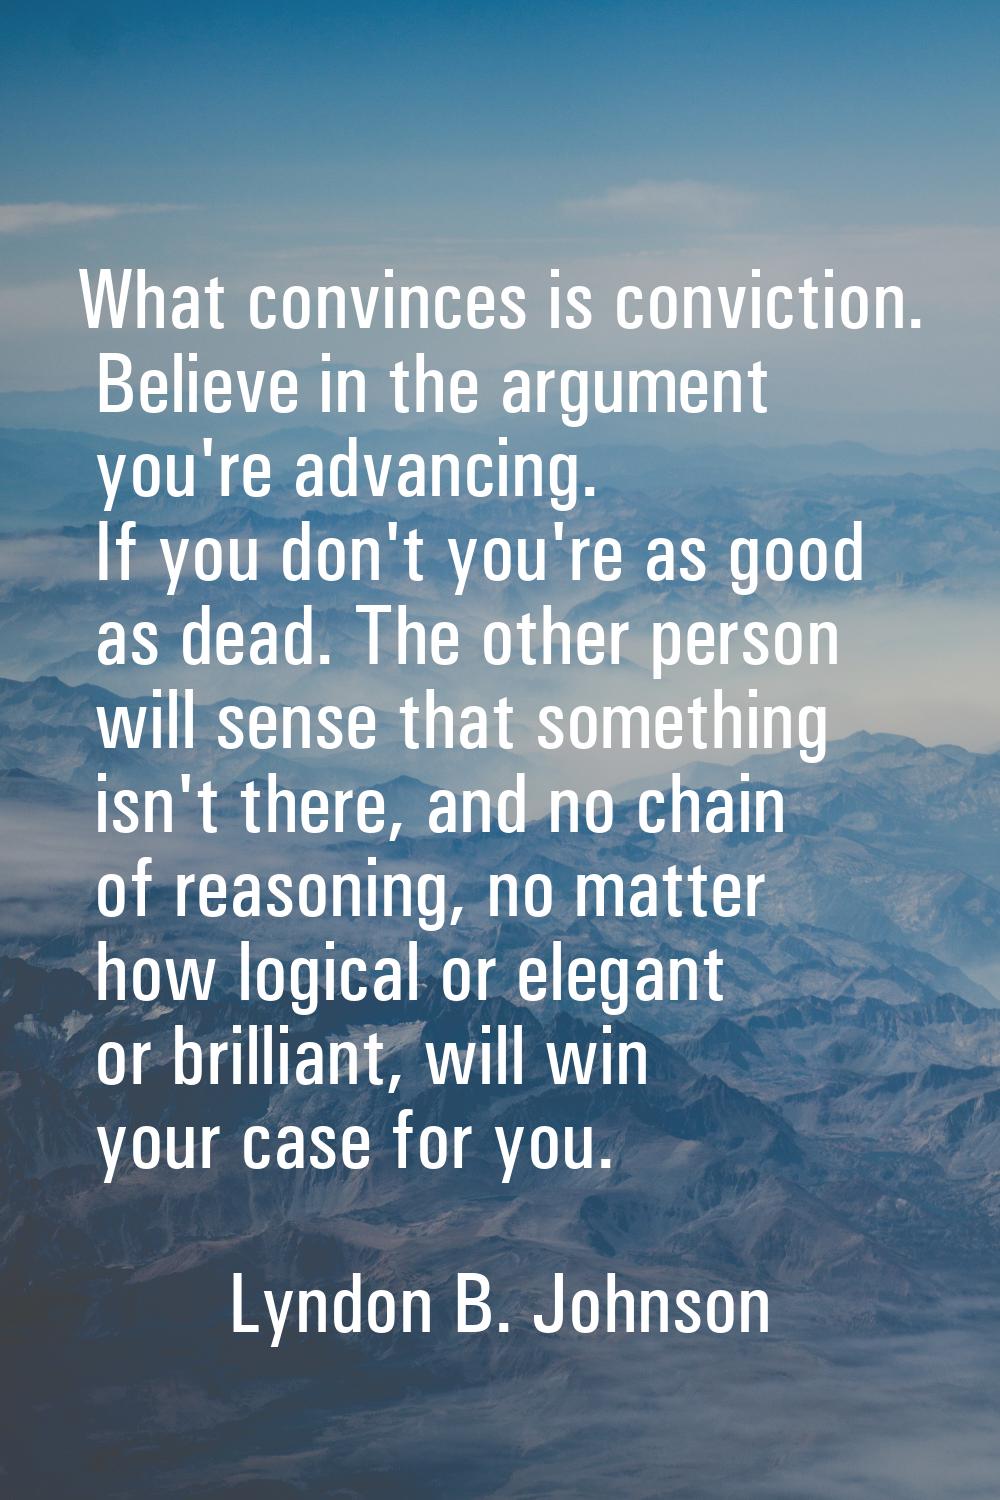 What convinces is conviction. Believe in the argument you're advancing. If you don't you're as good